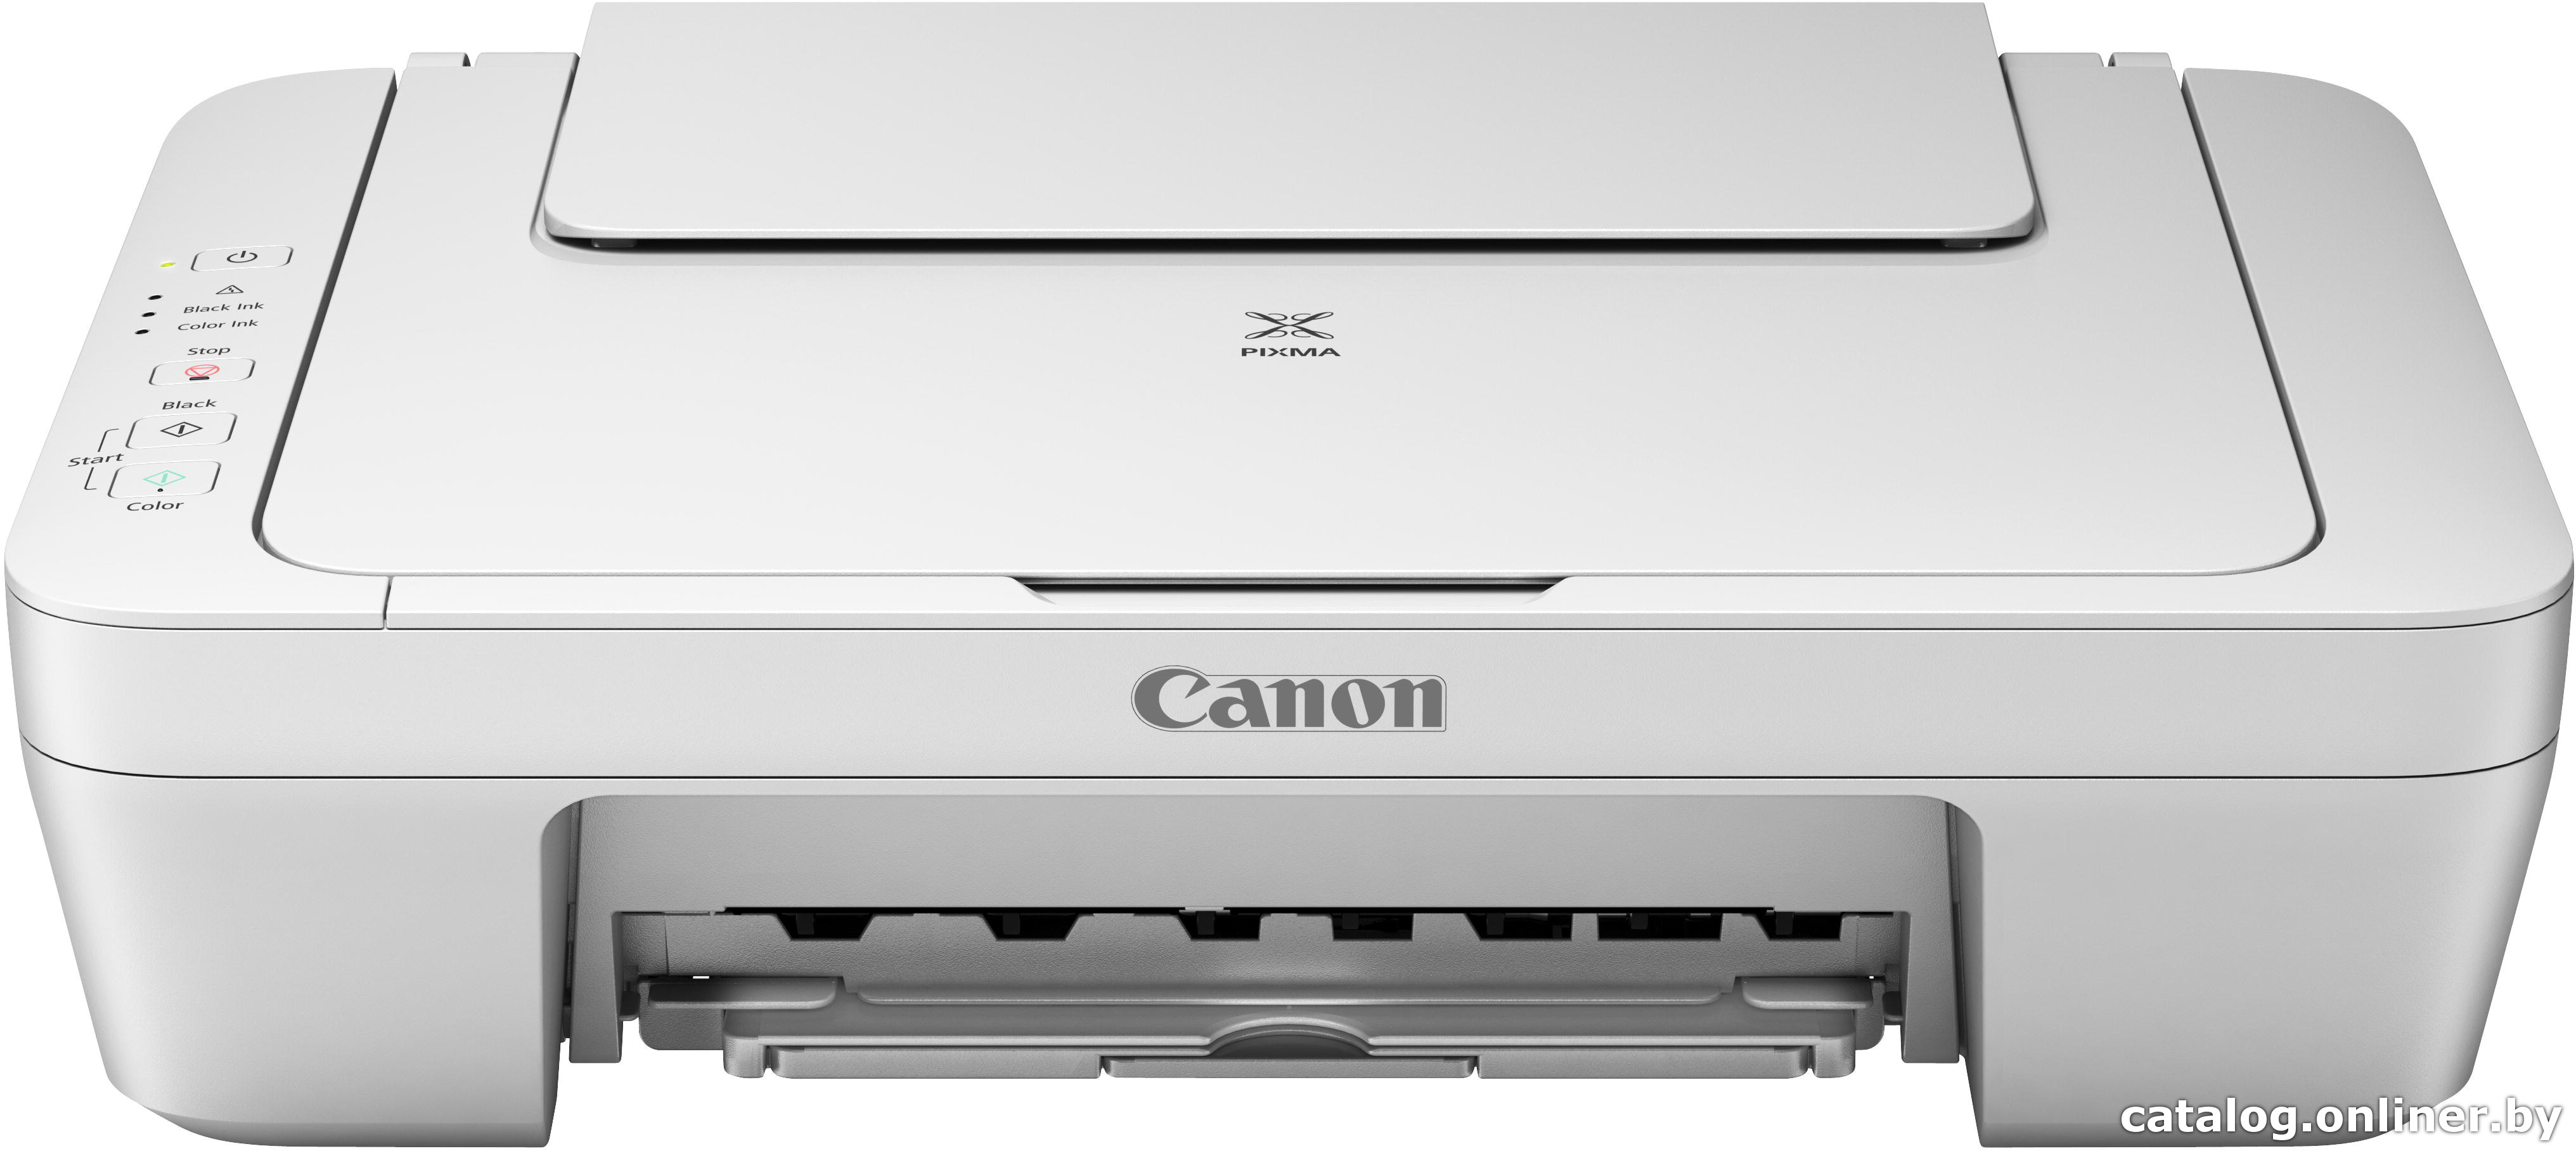 Canon MG2540 Scanner Driver Mac High Sierra 10.13 How to Download and Install - Featured